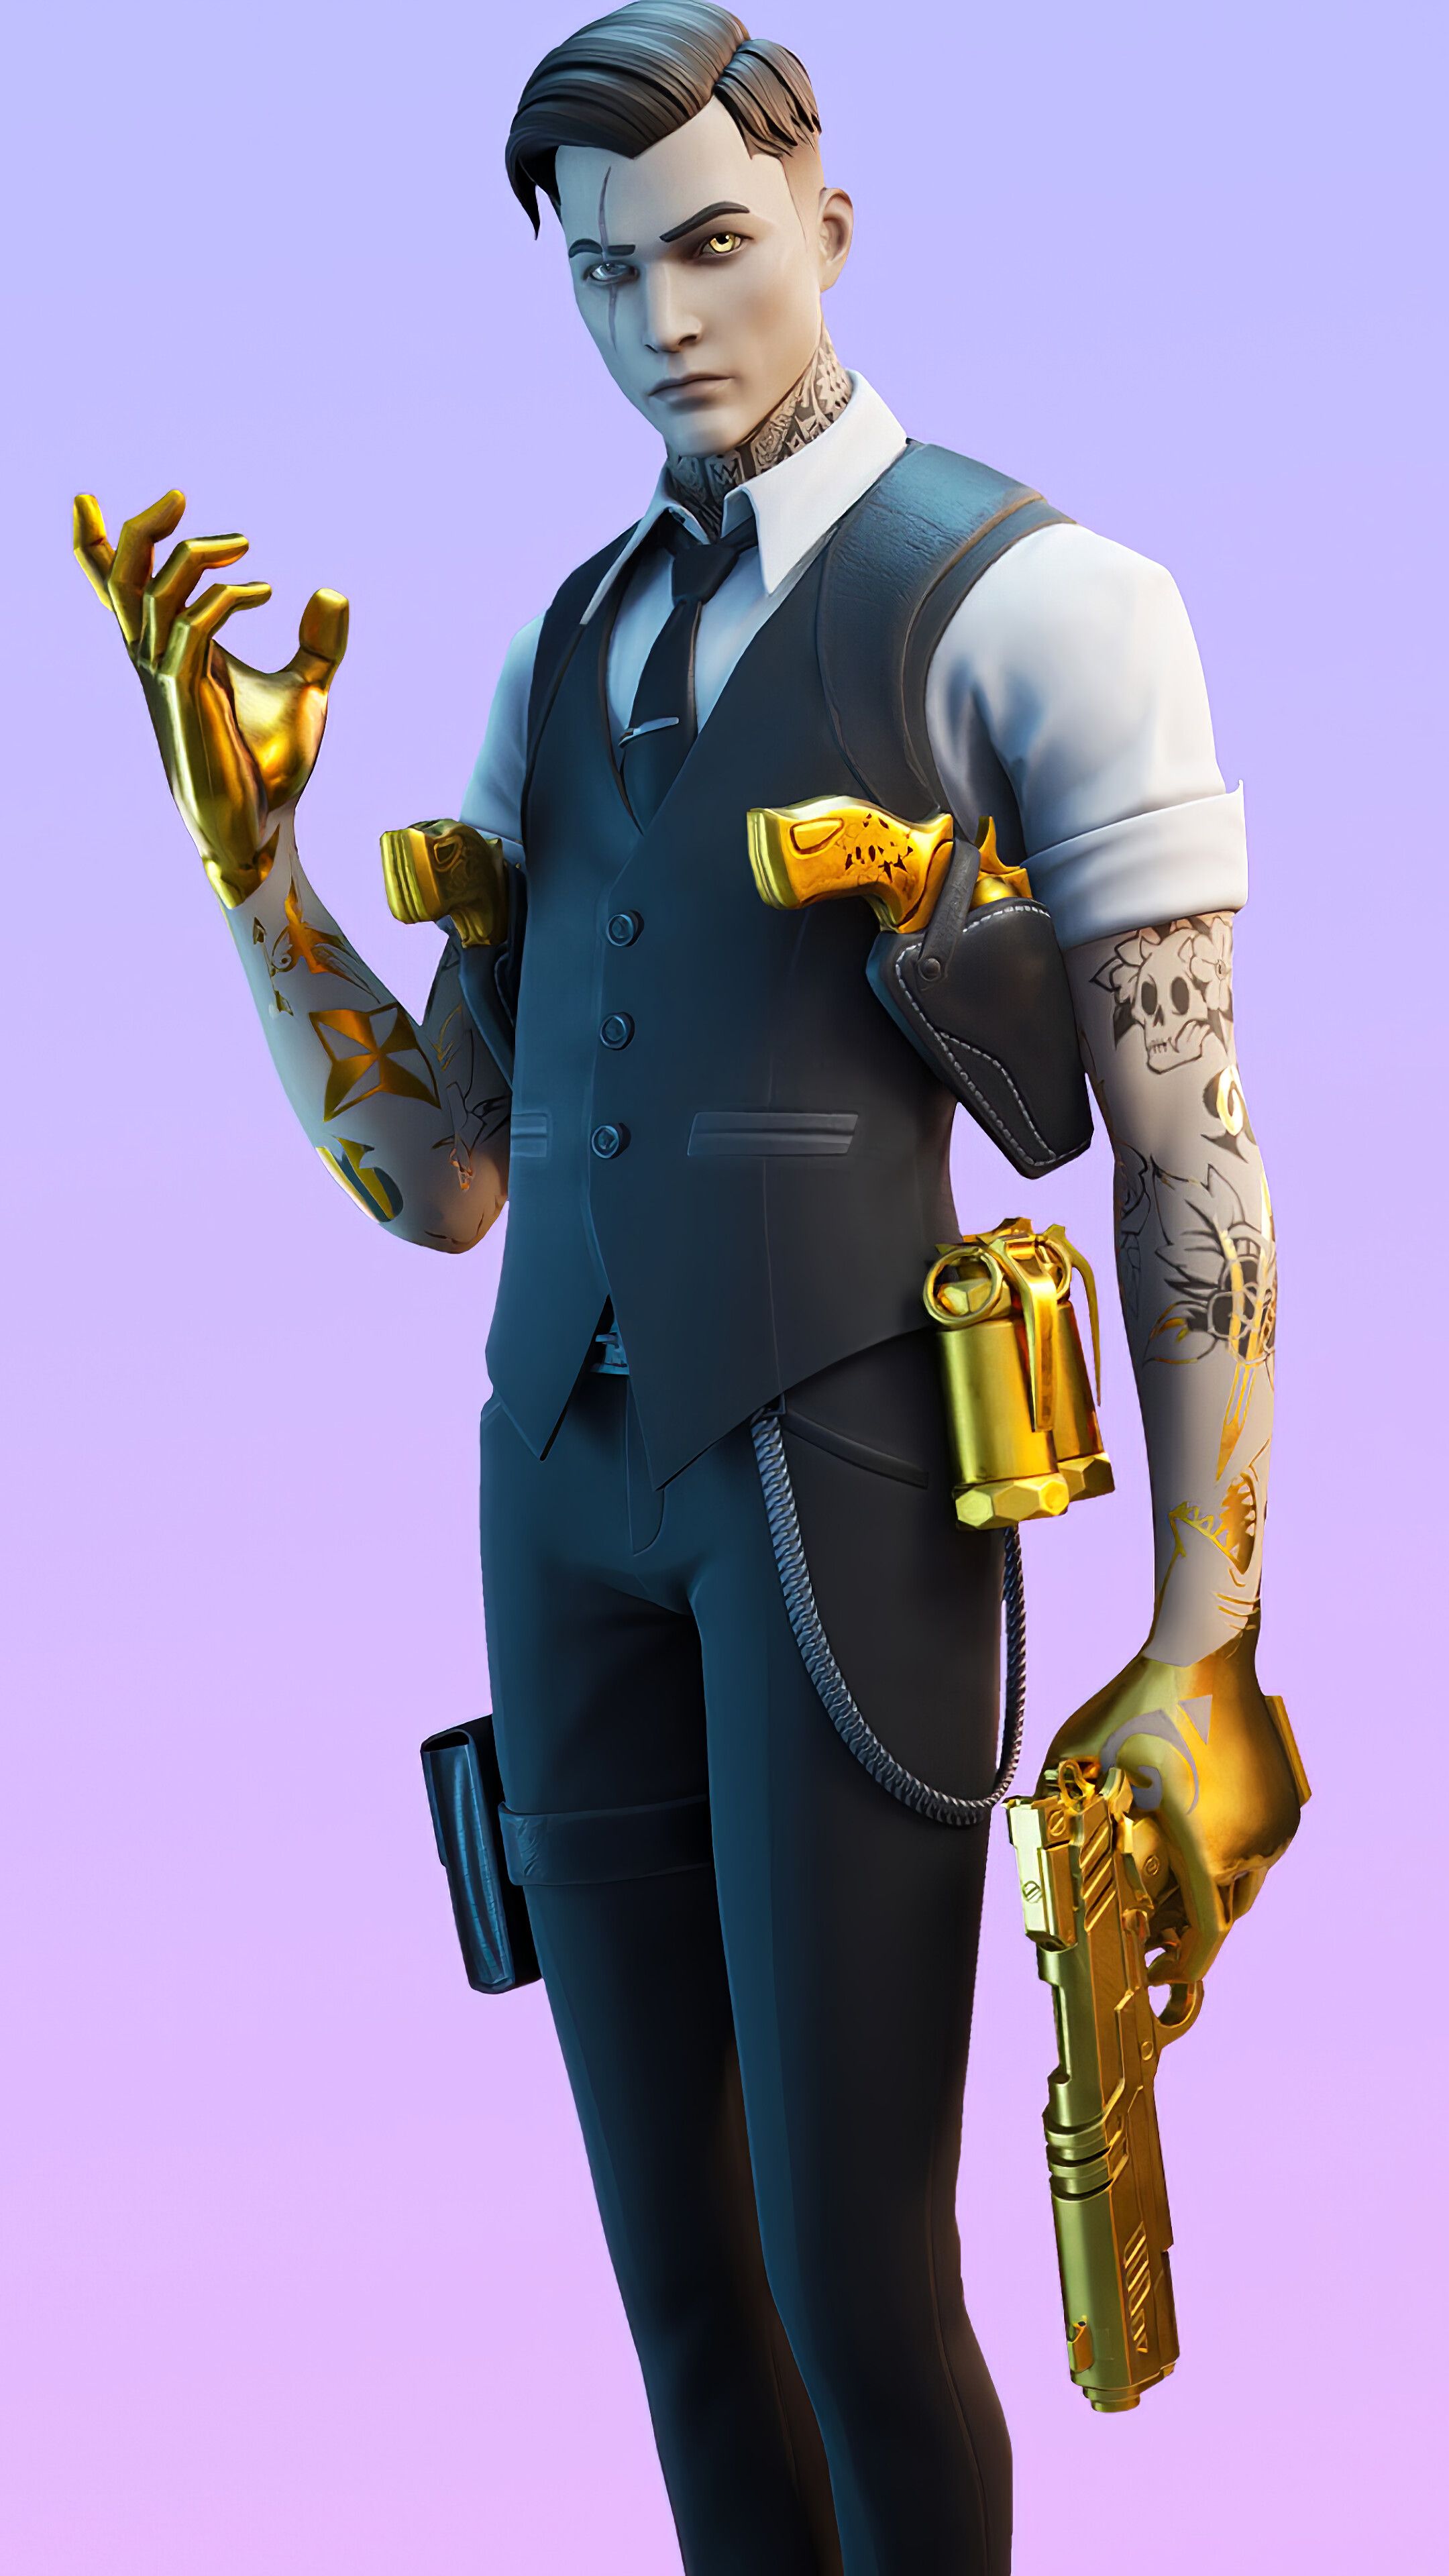 Fortnite, Midas, Skin, Outfit, 4K phone HD Wallpaper, Image, Background, Photo and Picture